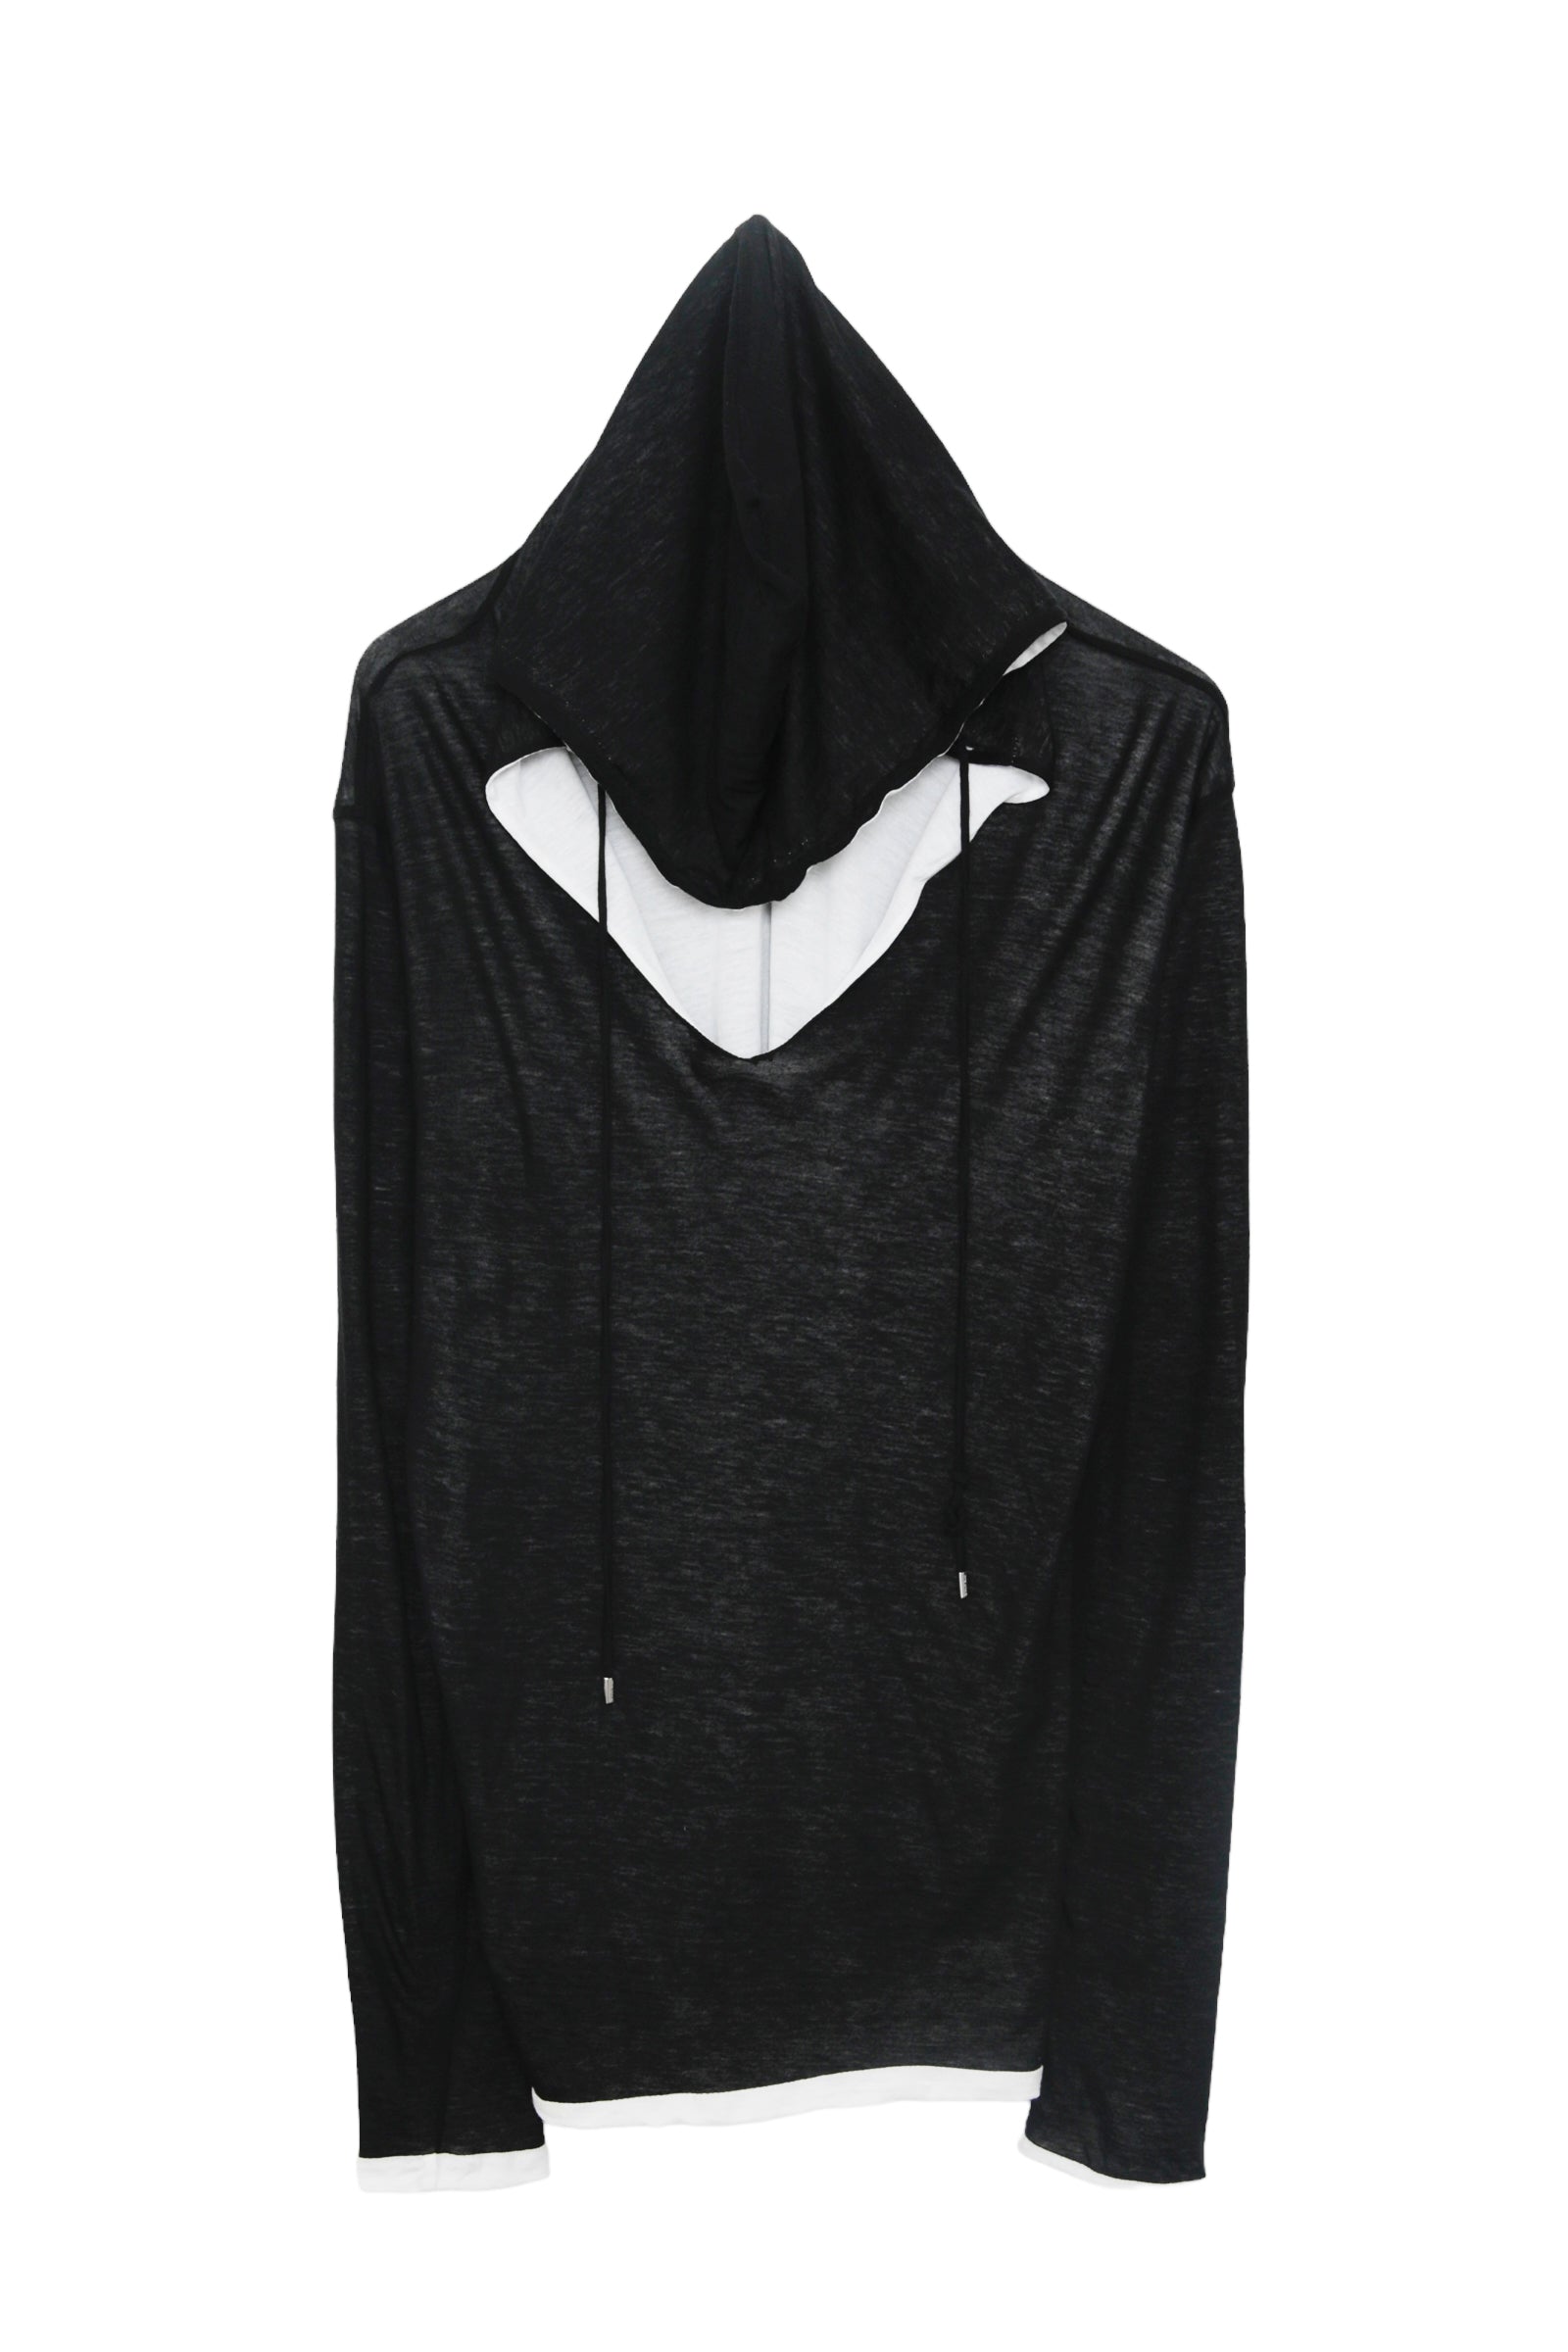 2010S/S DIOR HOMME HOODED LONG SLEEVE TOP